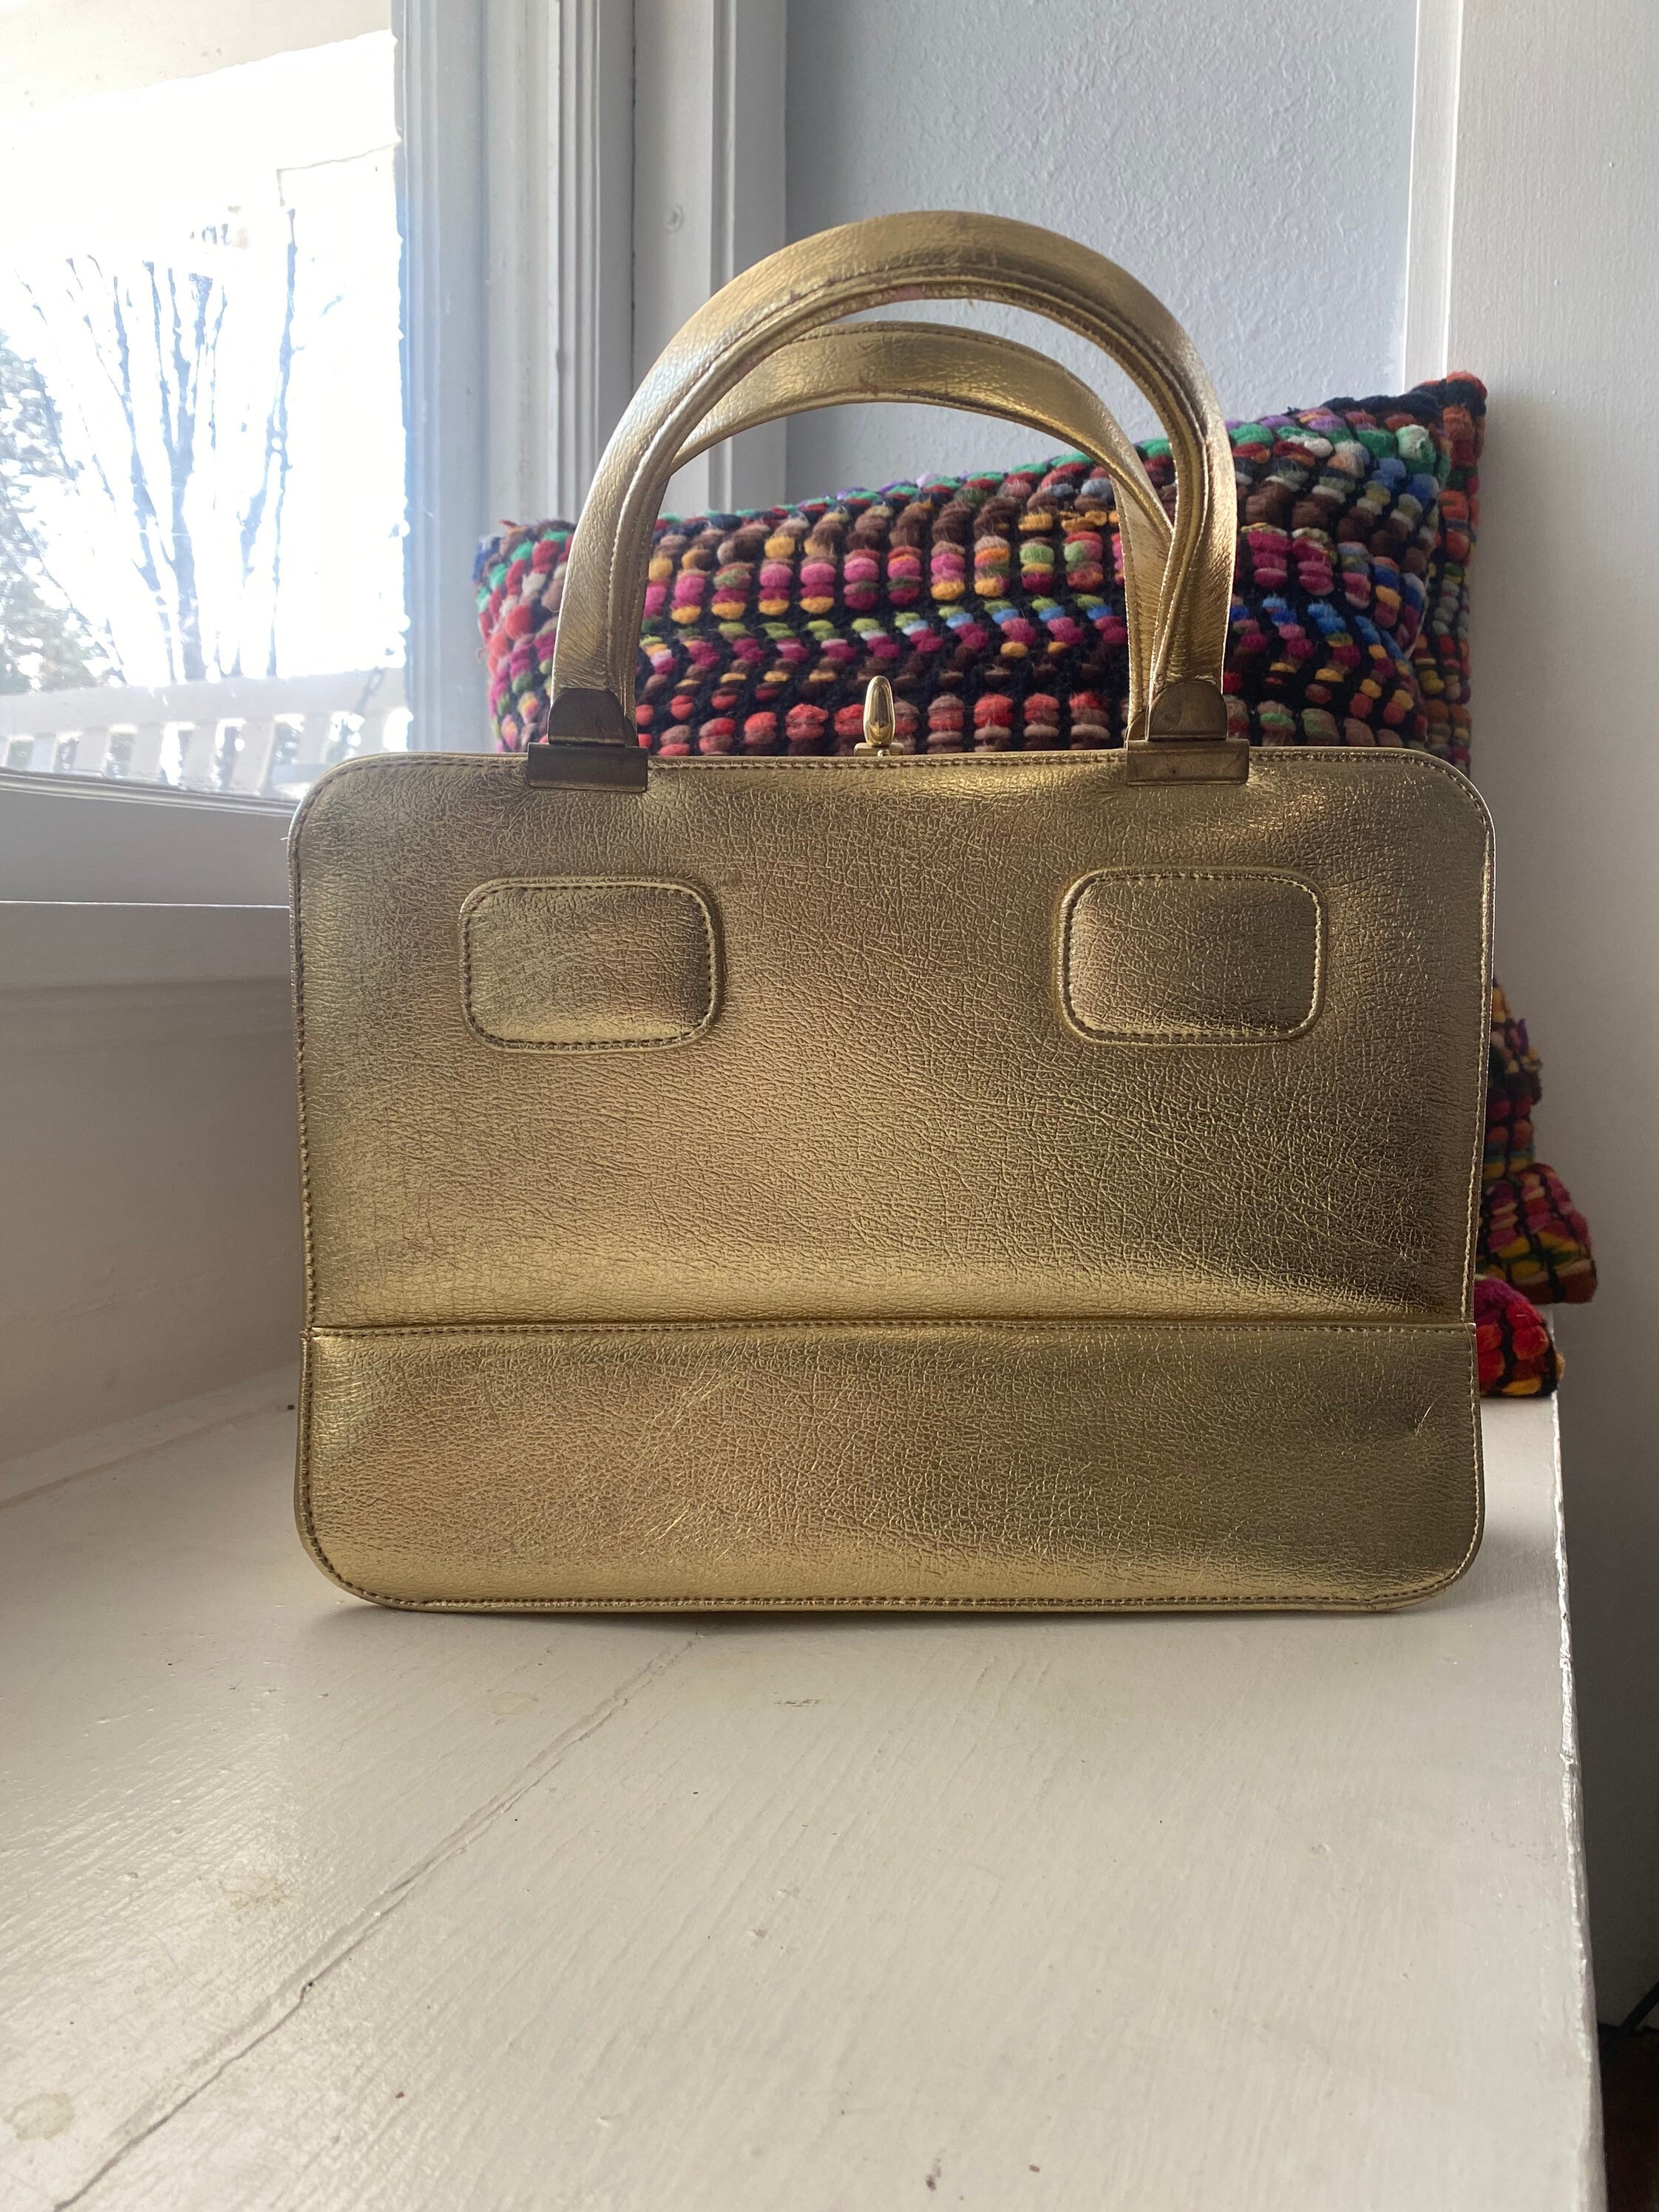 Vintage shoulder bag from the firm LOUIS VUITTON in cognac color leather.  Flap closed with gold metal closure and engraved brand. Interior with  pocket. Adjustable length. Excellent state of conservation (the metal